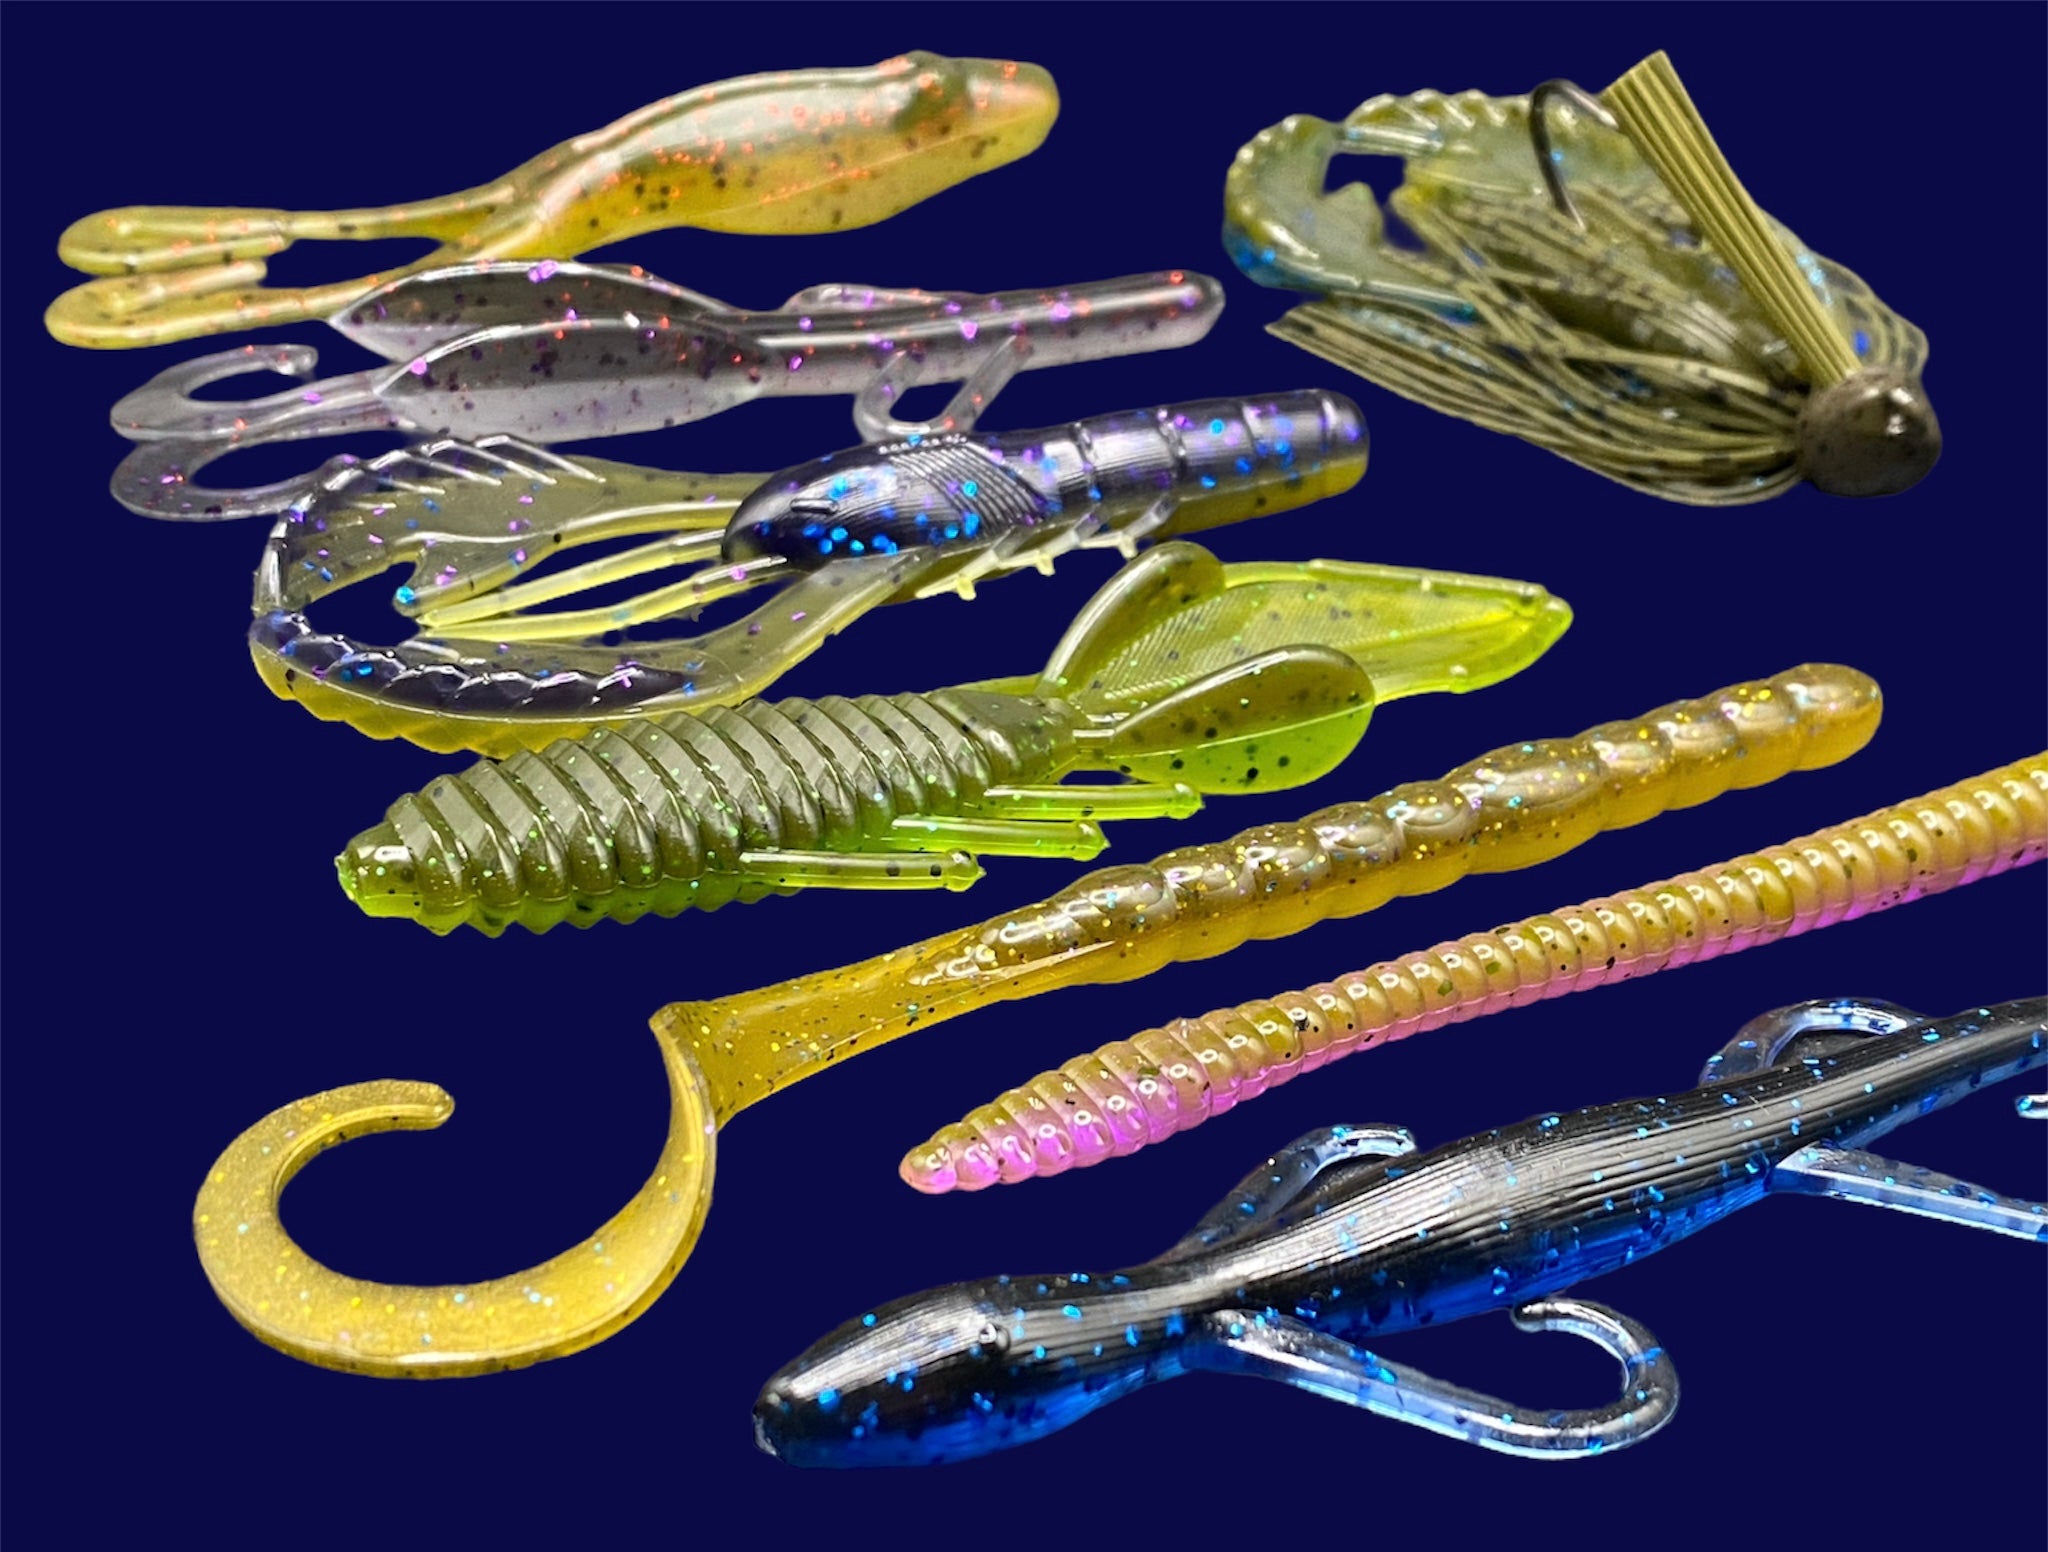 Soft Fishing Lures for sale